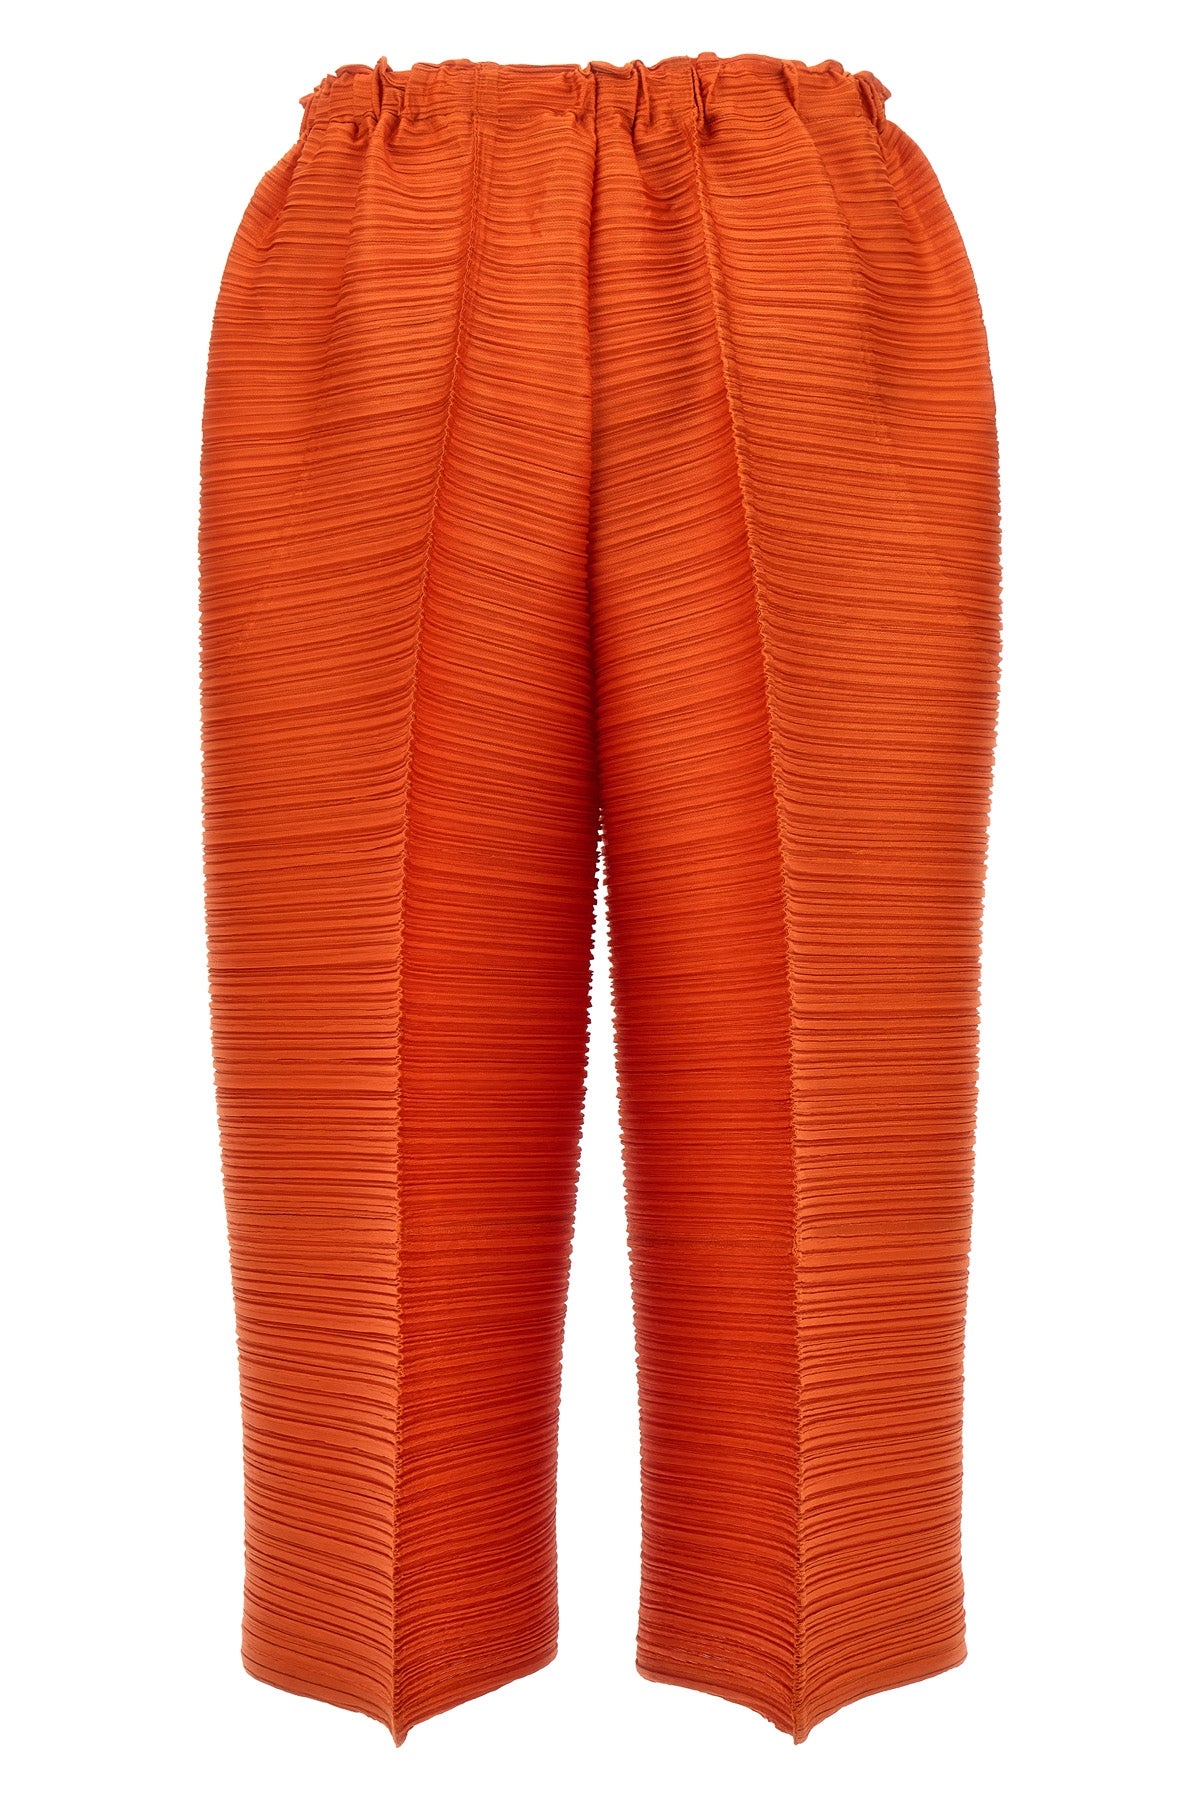 PLEATS Please ISSEY MIYAKE 'THICKER BOUNCE' PANTS